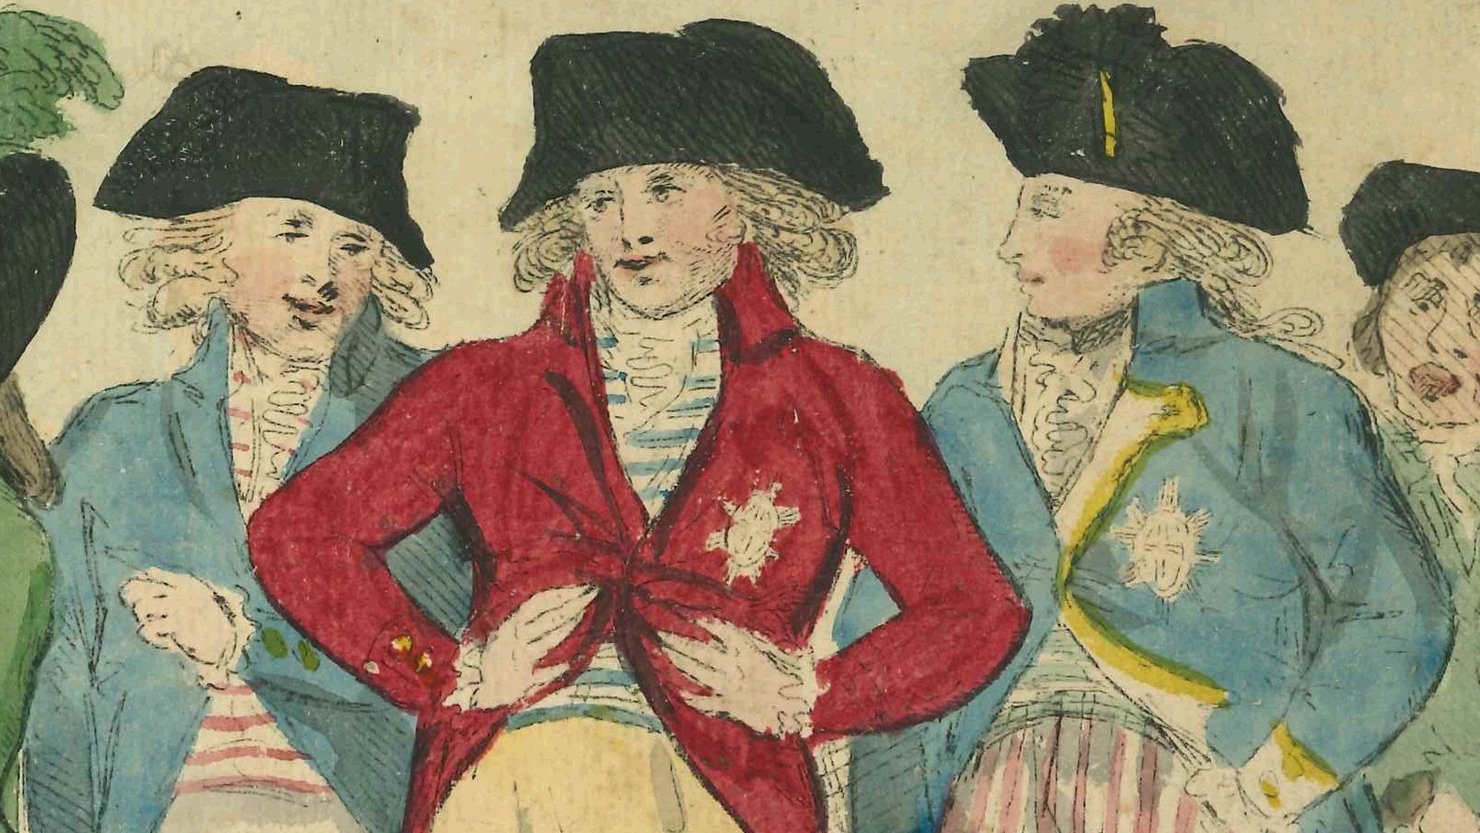 Prince of Wales image, 1788 from The Box Plymouth